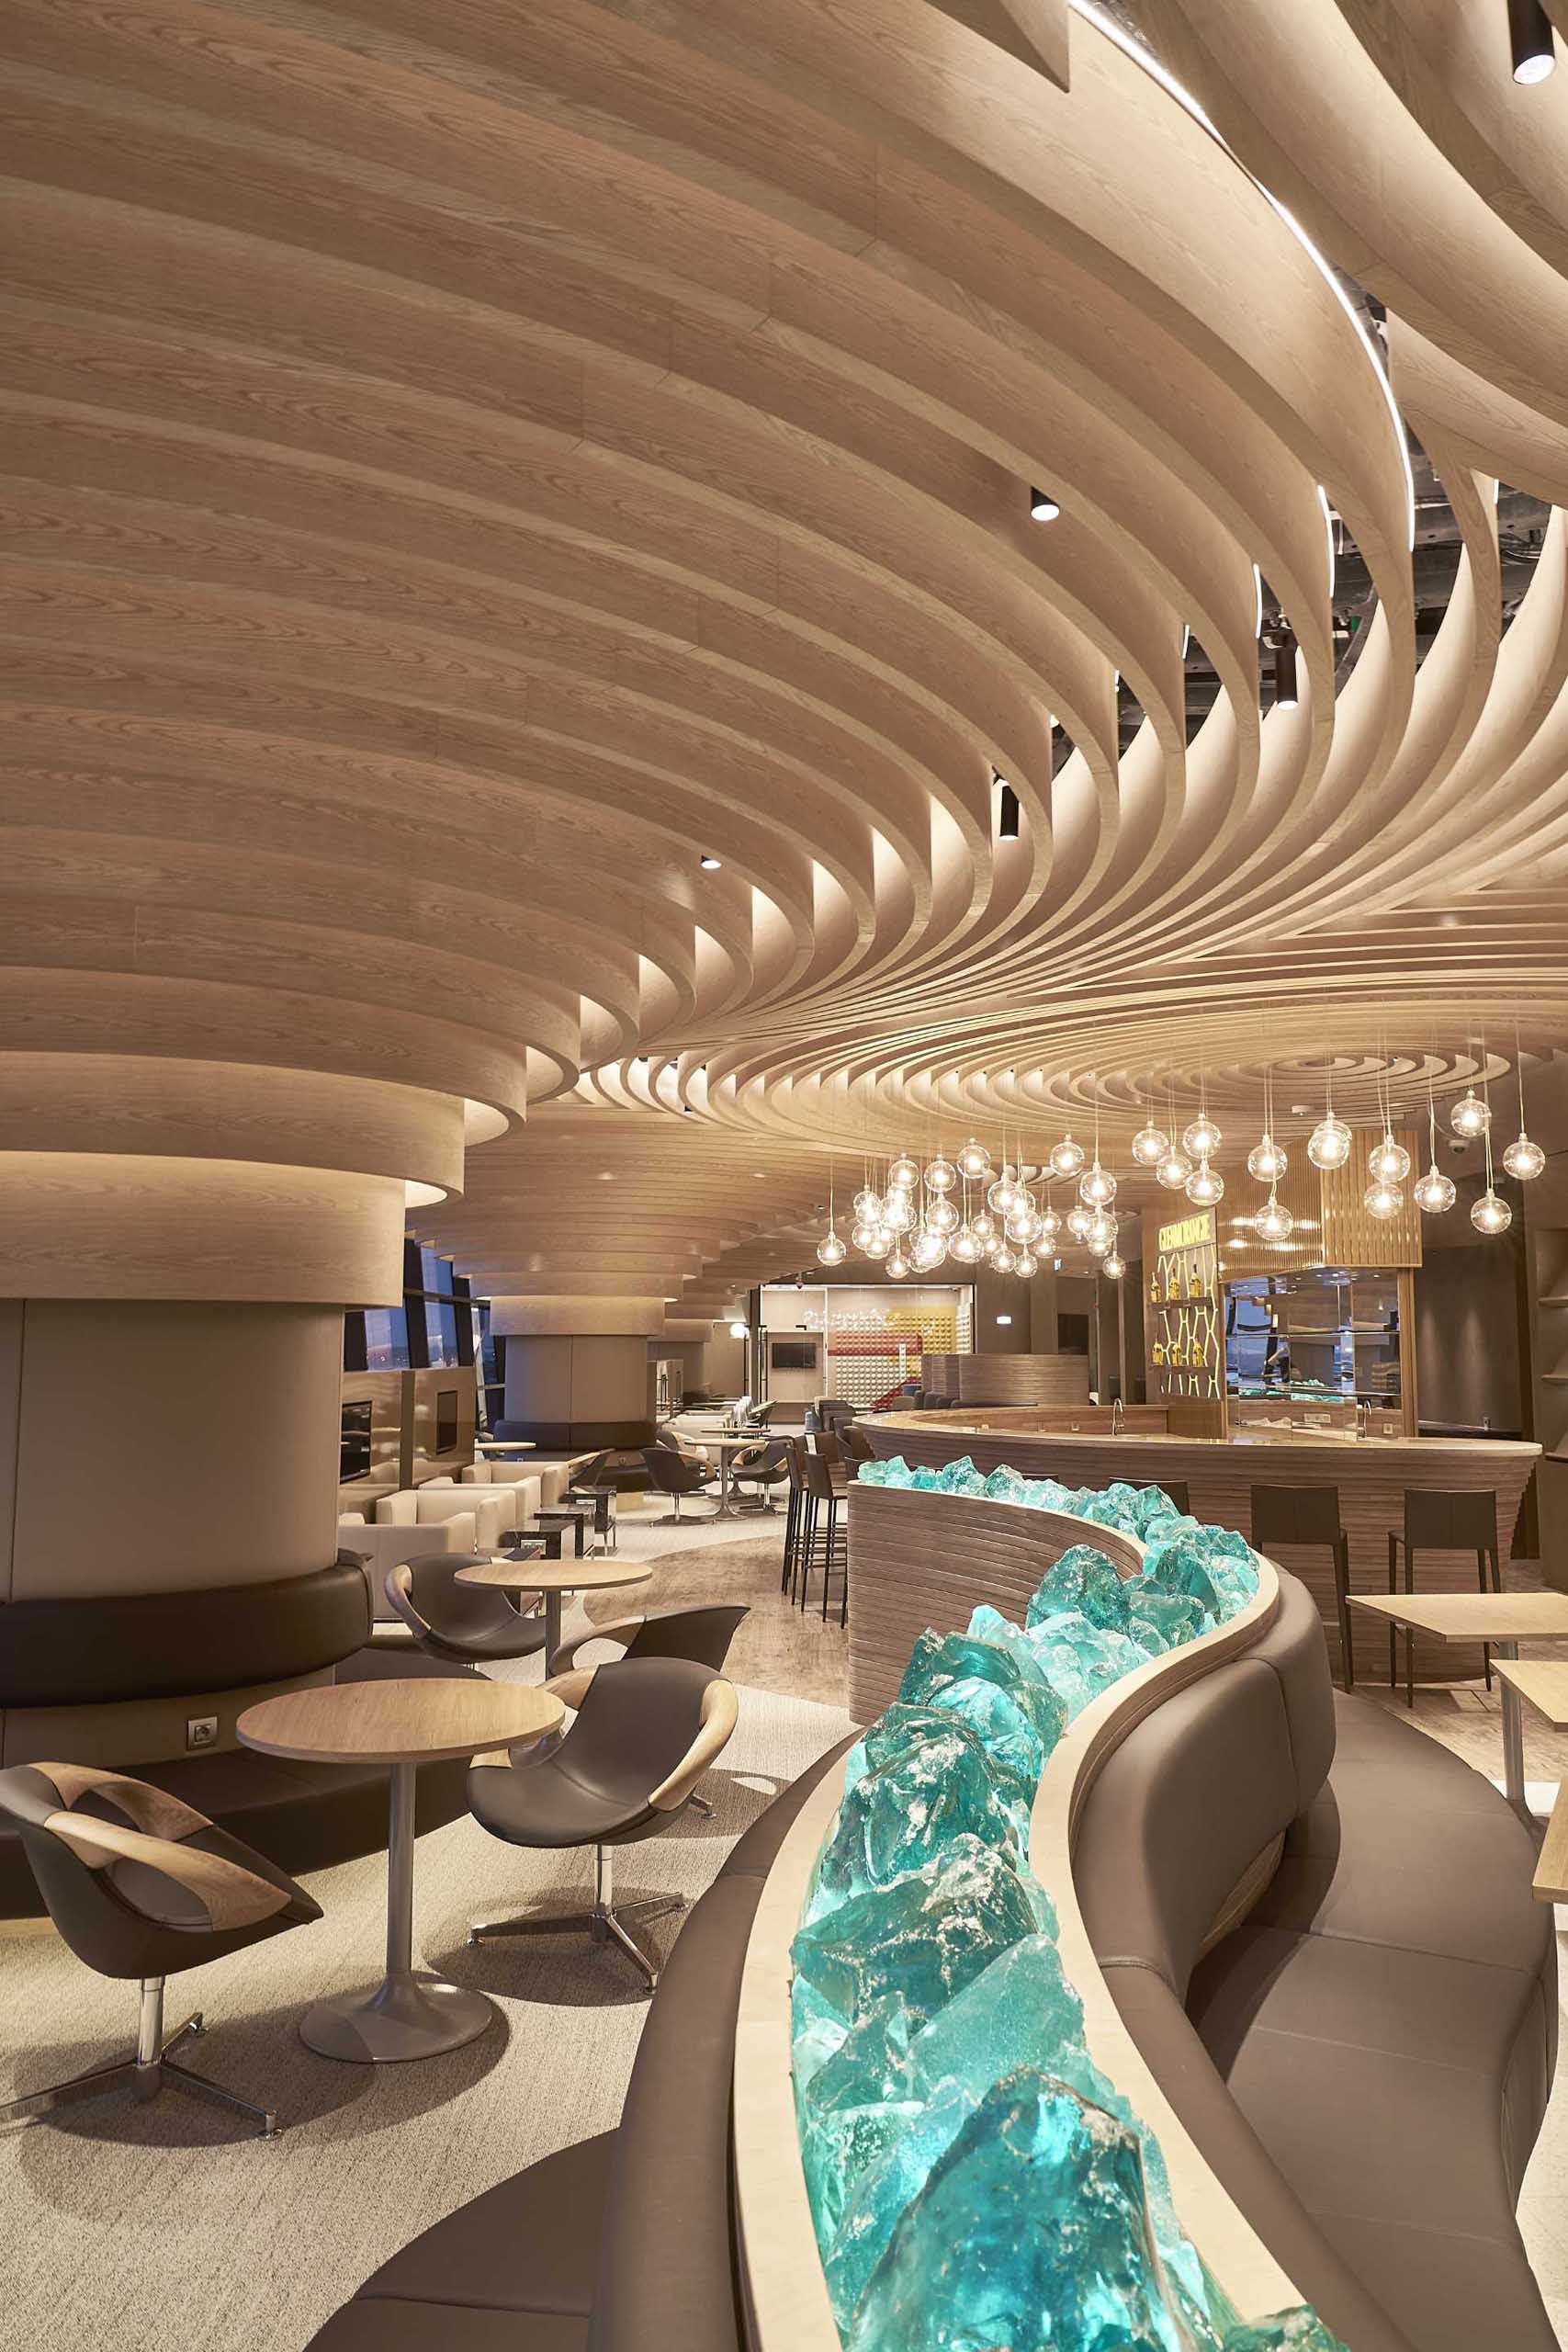 Geometric forms made from curved wood cover the ceiling of this airport lounge.